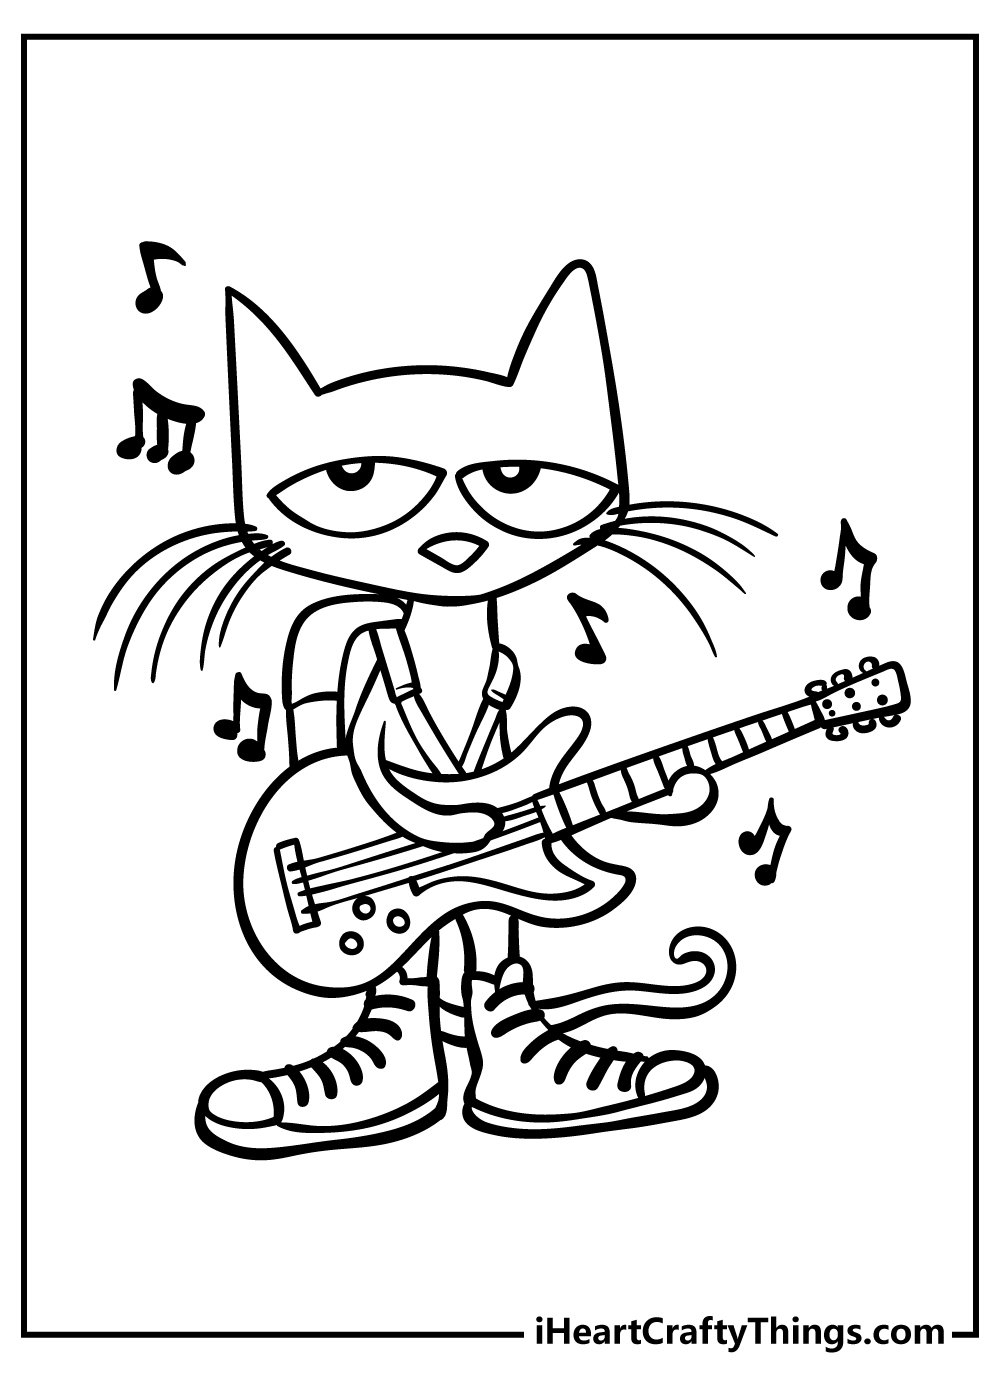 Pete The Cat Coloring Pages for adults free printable